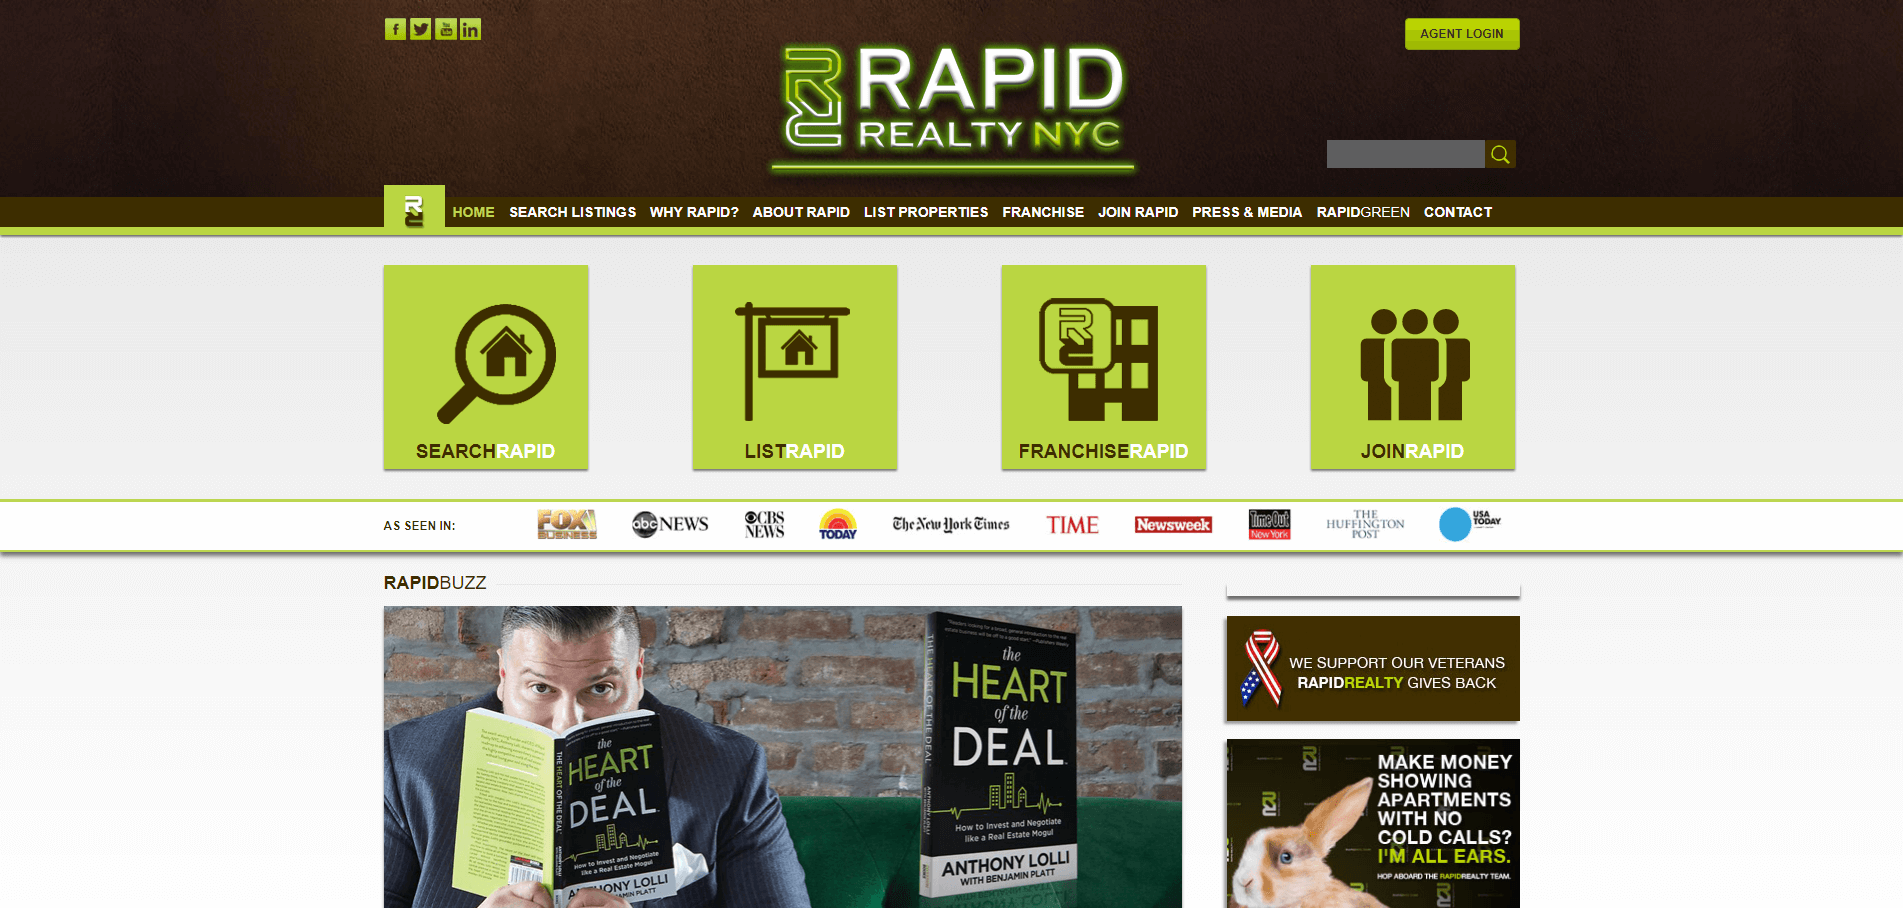  Check this out!  We made a list of the 101 best real estate websites.  Each site is ranked 1-101 with a description and review.  Here's rapidnyc.com.  Is your site on the list? 